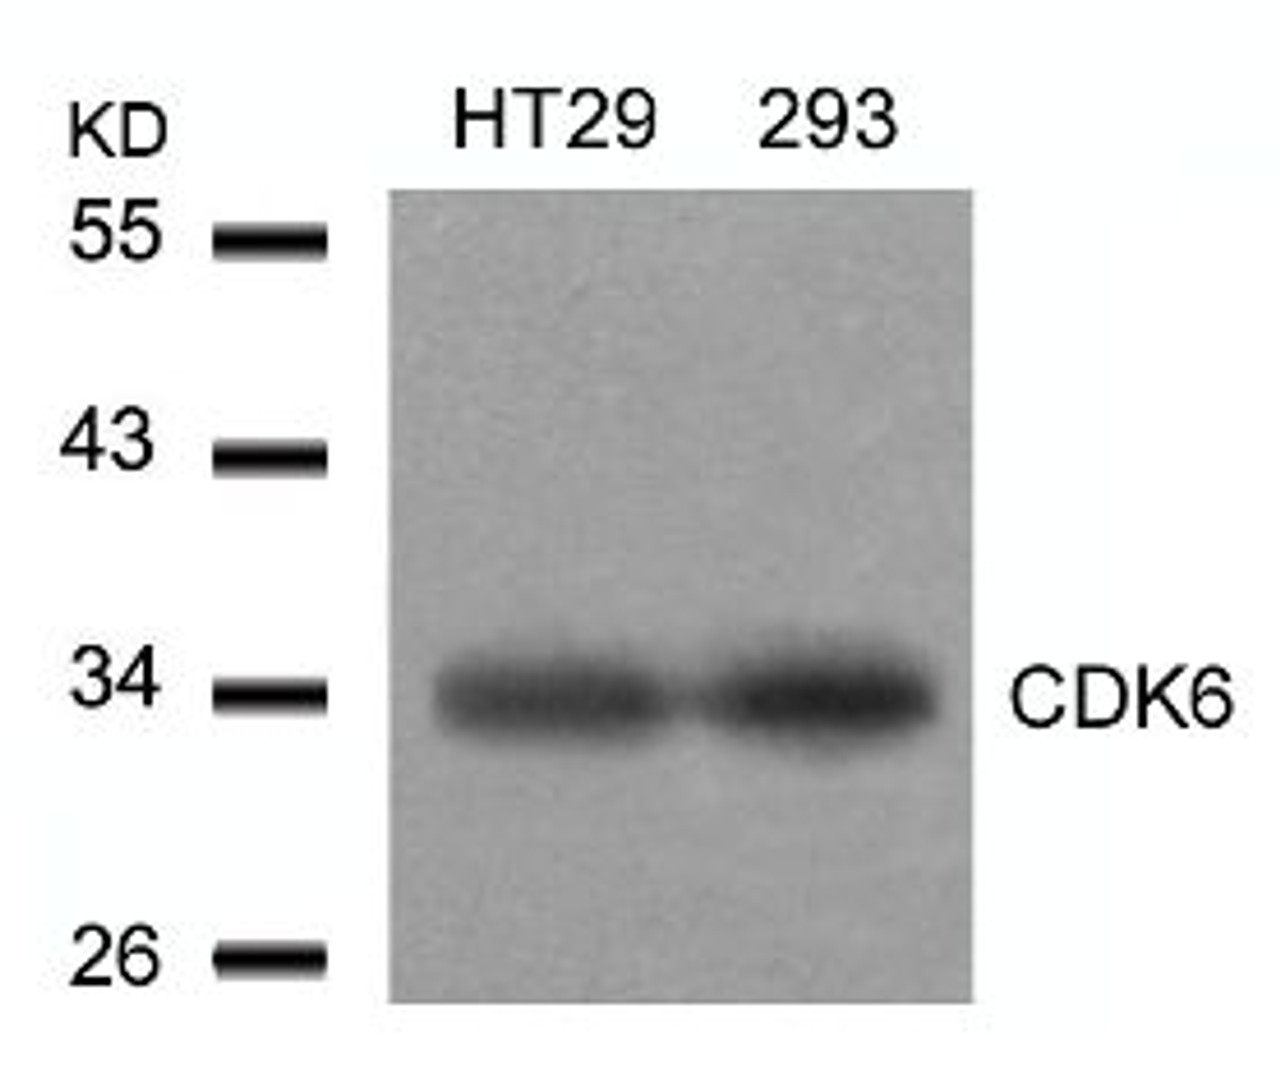 Western blot analysis of lysed extracts from HT29 and293 cells using CDK6 (Ab-24) .